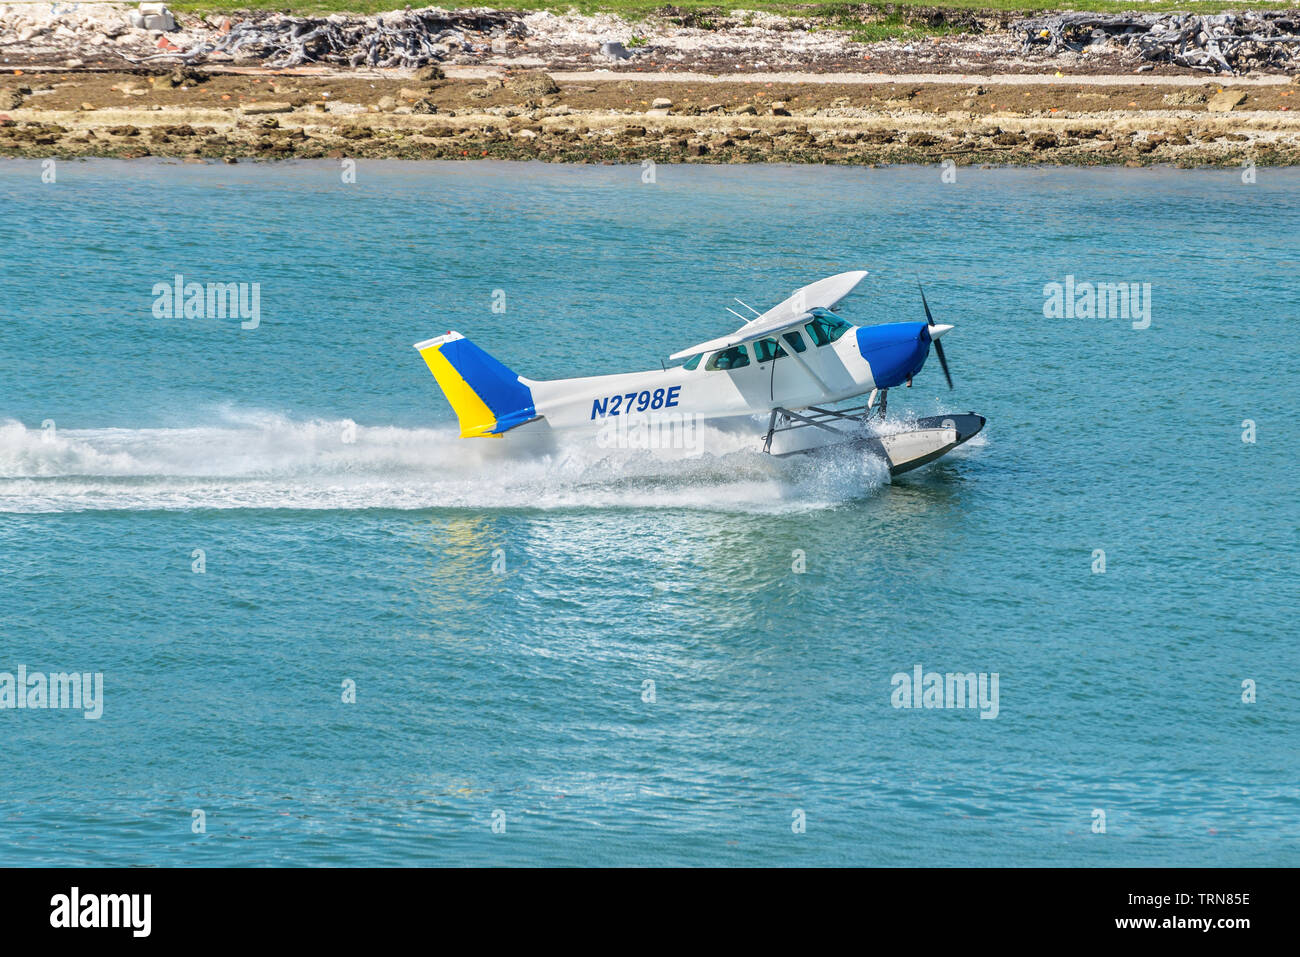 Miami, FL, United States - April 20, 2019: The Seaplane Cessna 172N Skyhawk takes off in the Miami Main channel next to the cruise port of Miami, Flor Stock Photo